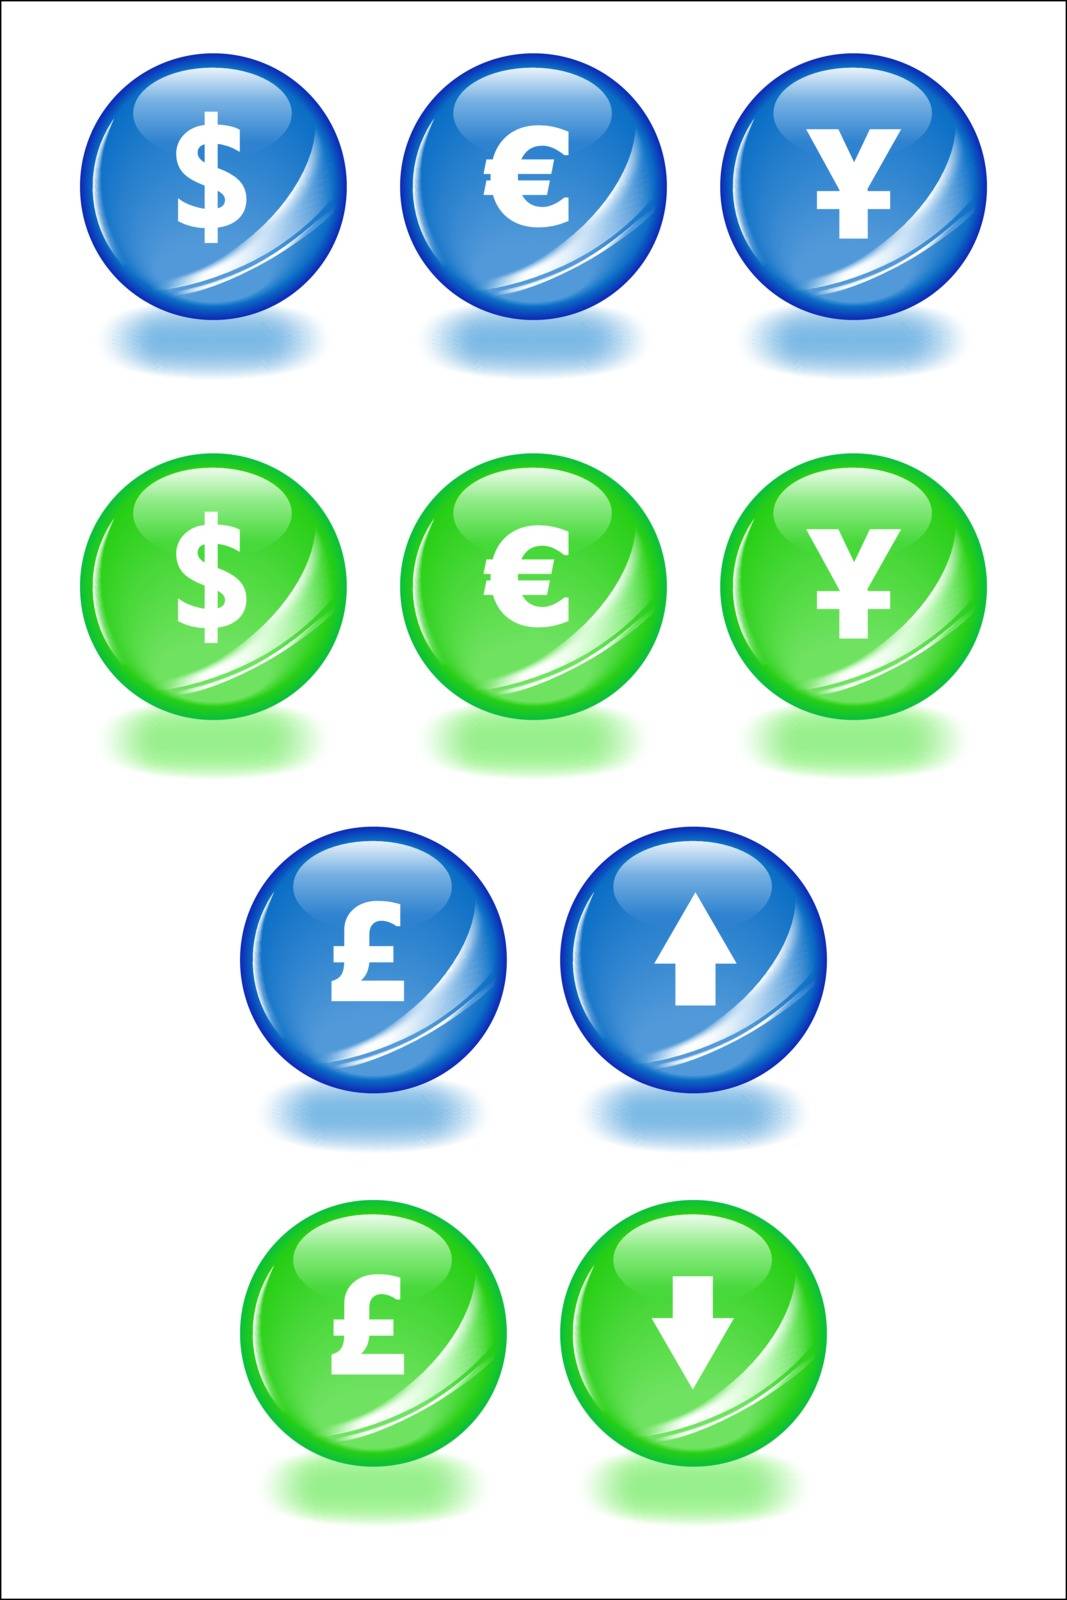 Set of vector spheres with shadow icons for businesss themes. Easy to edit, any size. Aqua web 2.0.